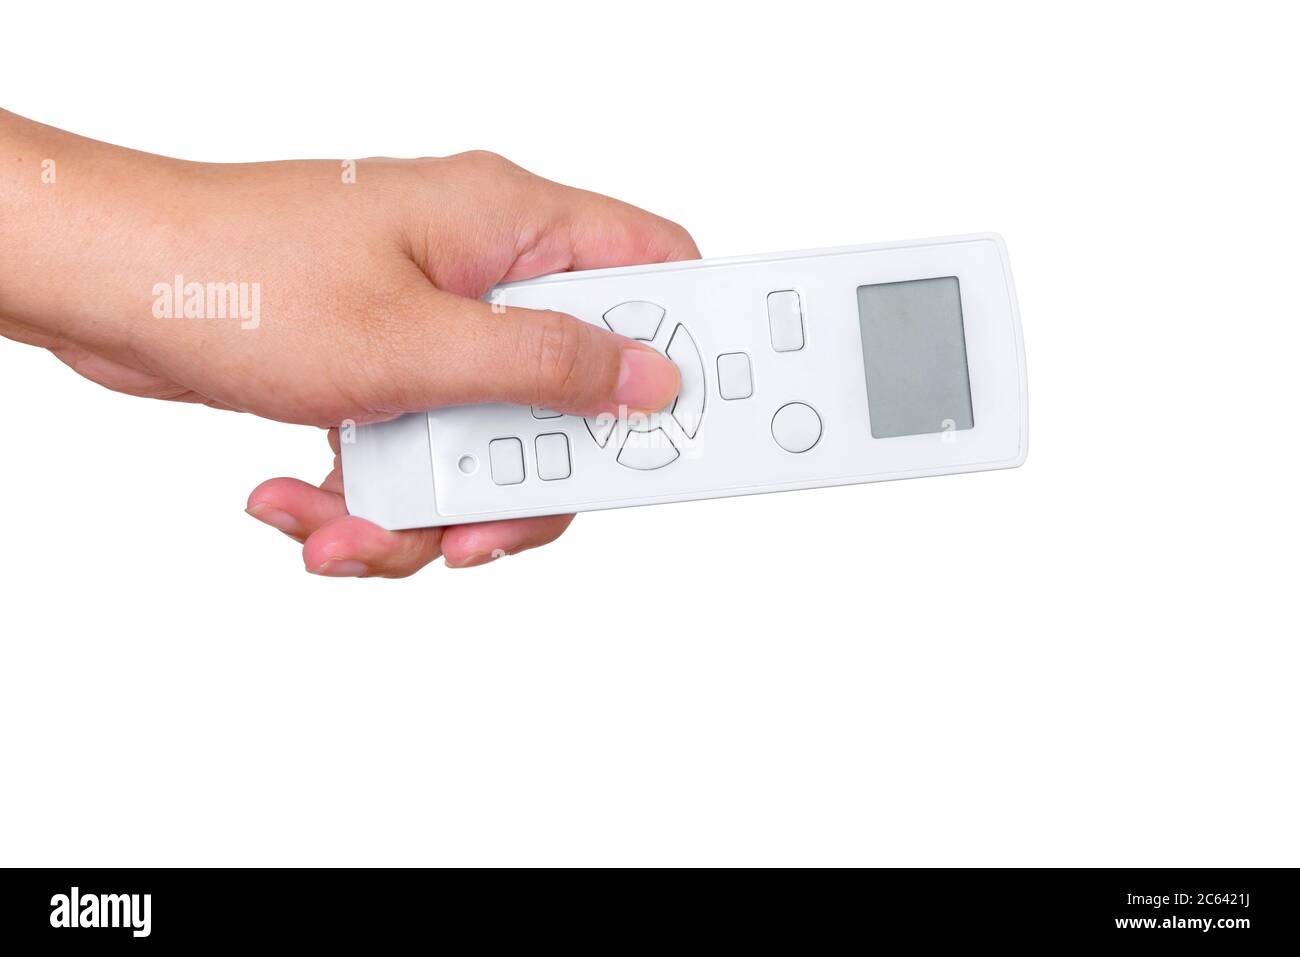 Air conditioner remote control with LCD display Stock Photo - Alamy